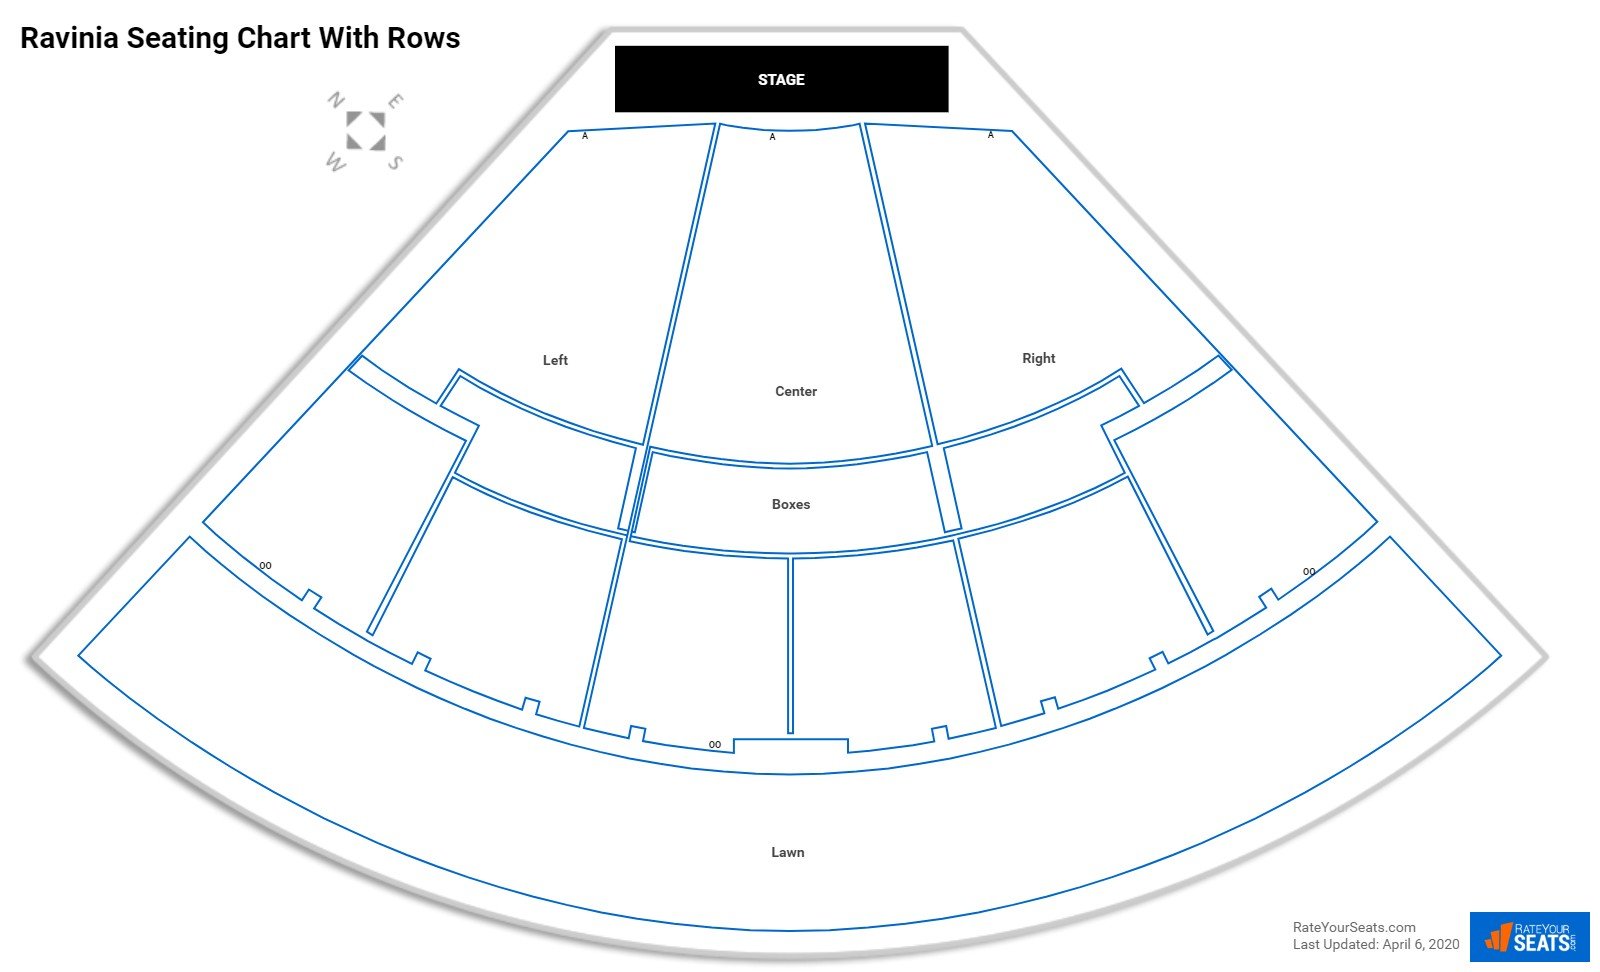 Ravinia seating chart with row numbers